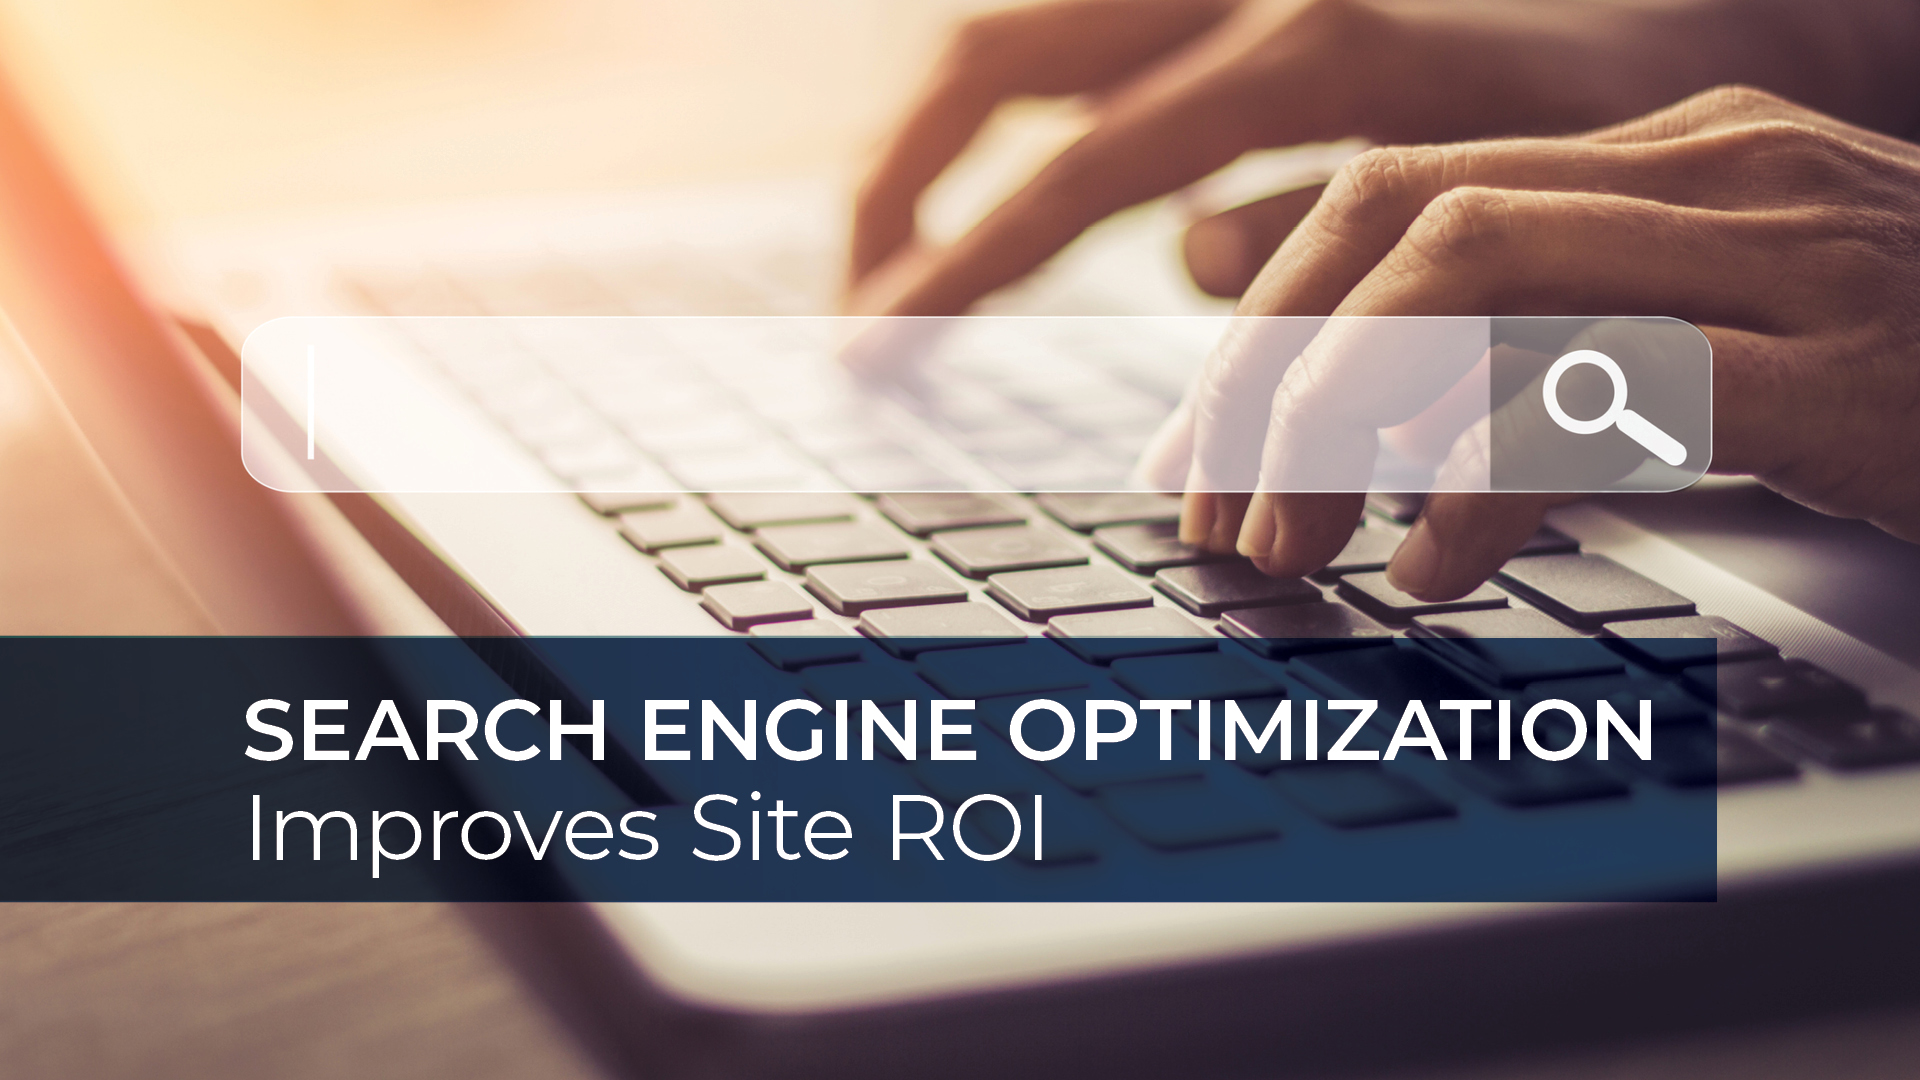 How Search Engine Optimization Can Improve the ROI on Your Business Site